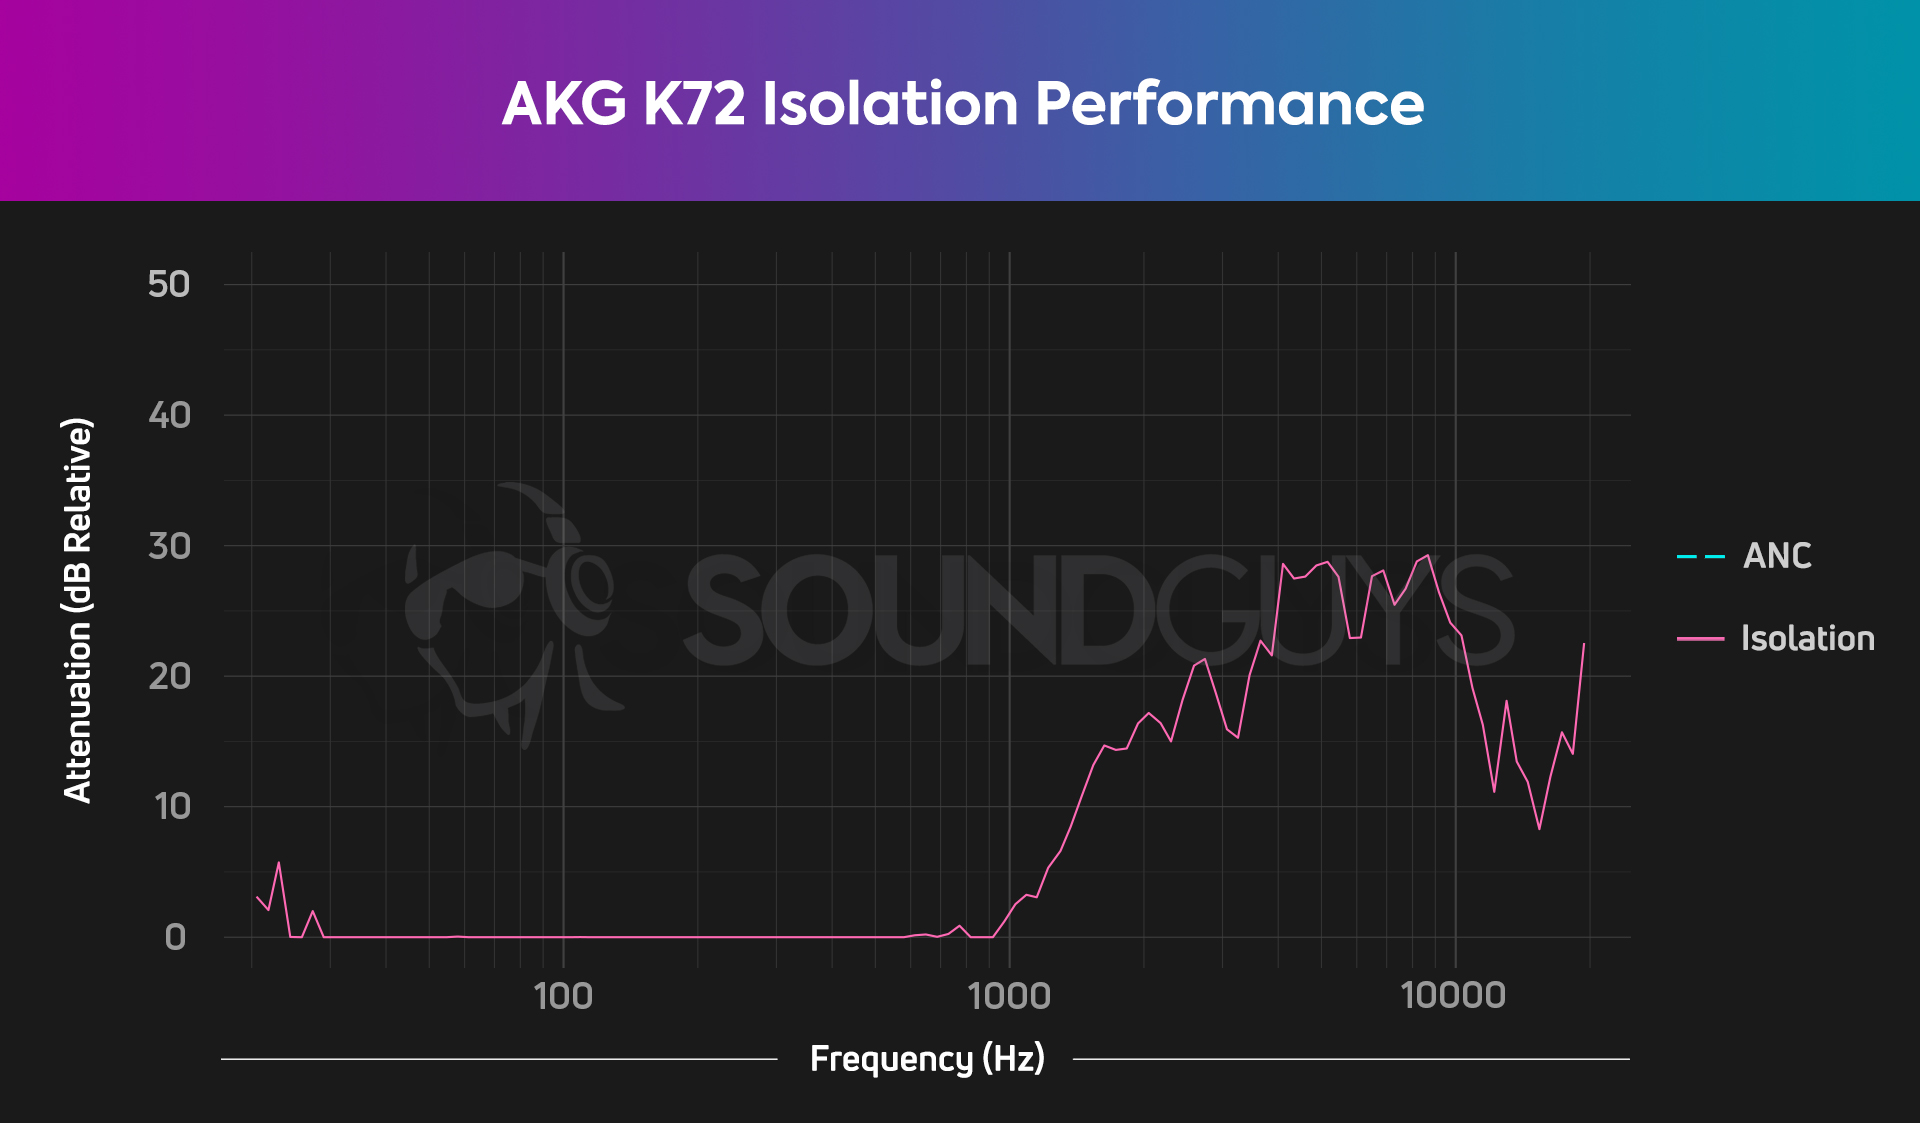 The isolating properties of the AKG K72 shown on a chart are not impressive.